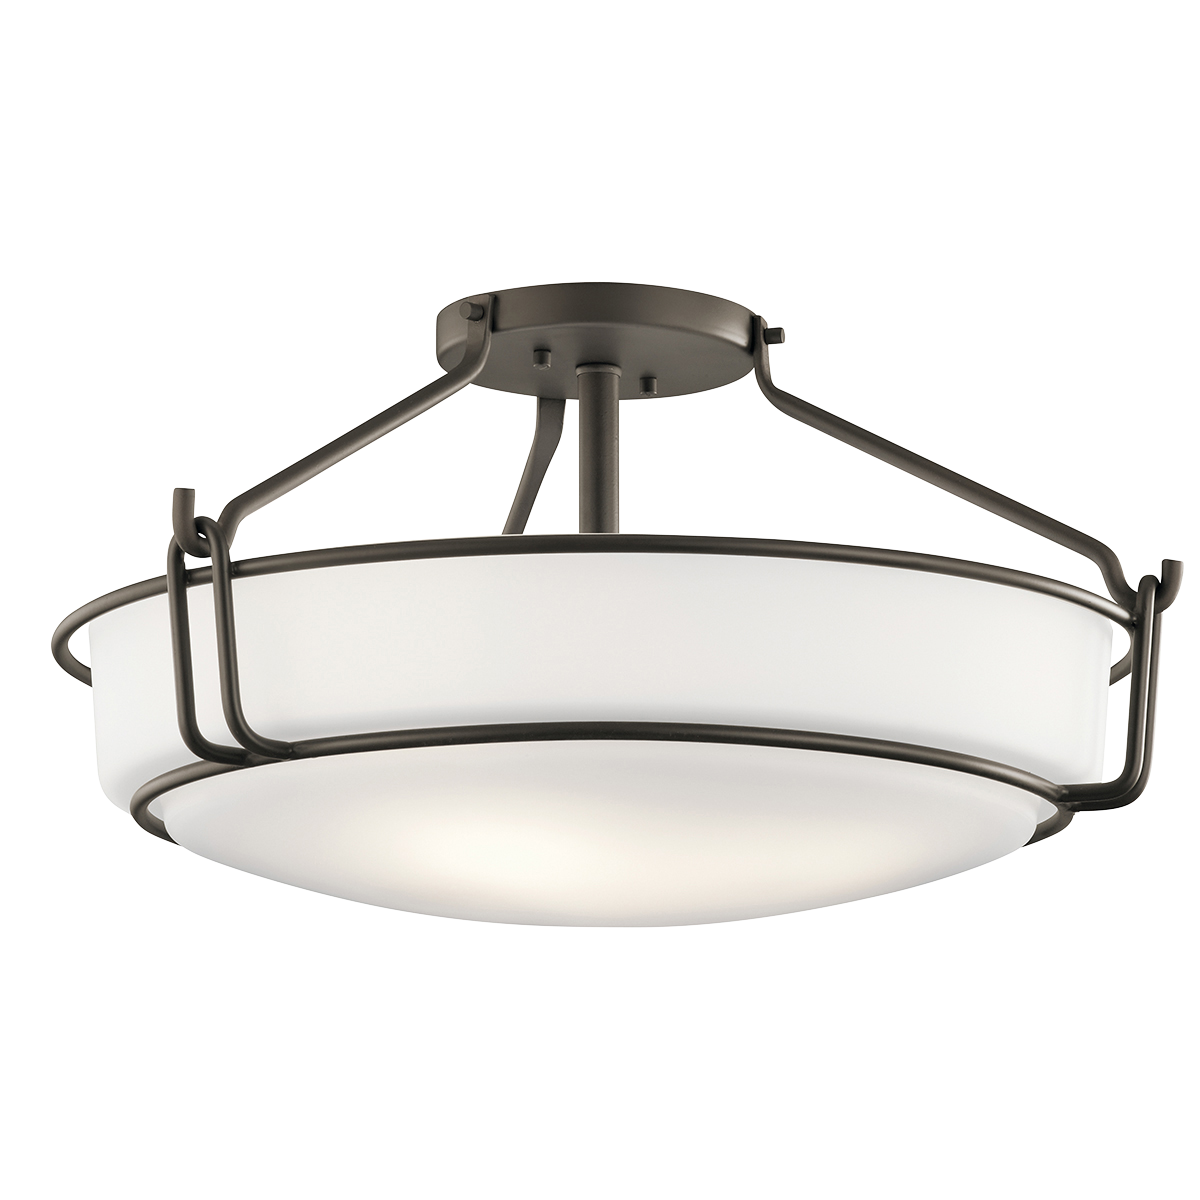 A simple and clean design make the 4-light semi flush fixture in Olde Bronze from the Alkire collection a modern classic. The semi-flush style provides a generous amount of light, while the metal work in.hook and eyein. design adds visual interest overhead.